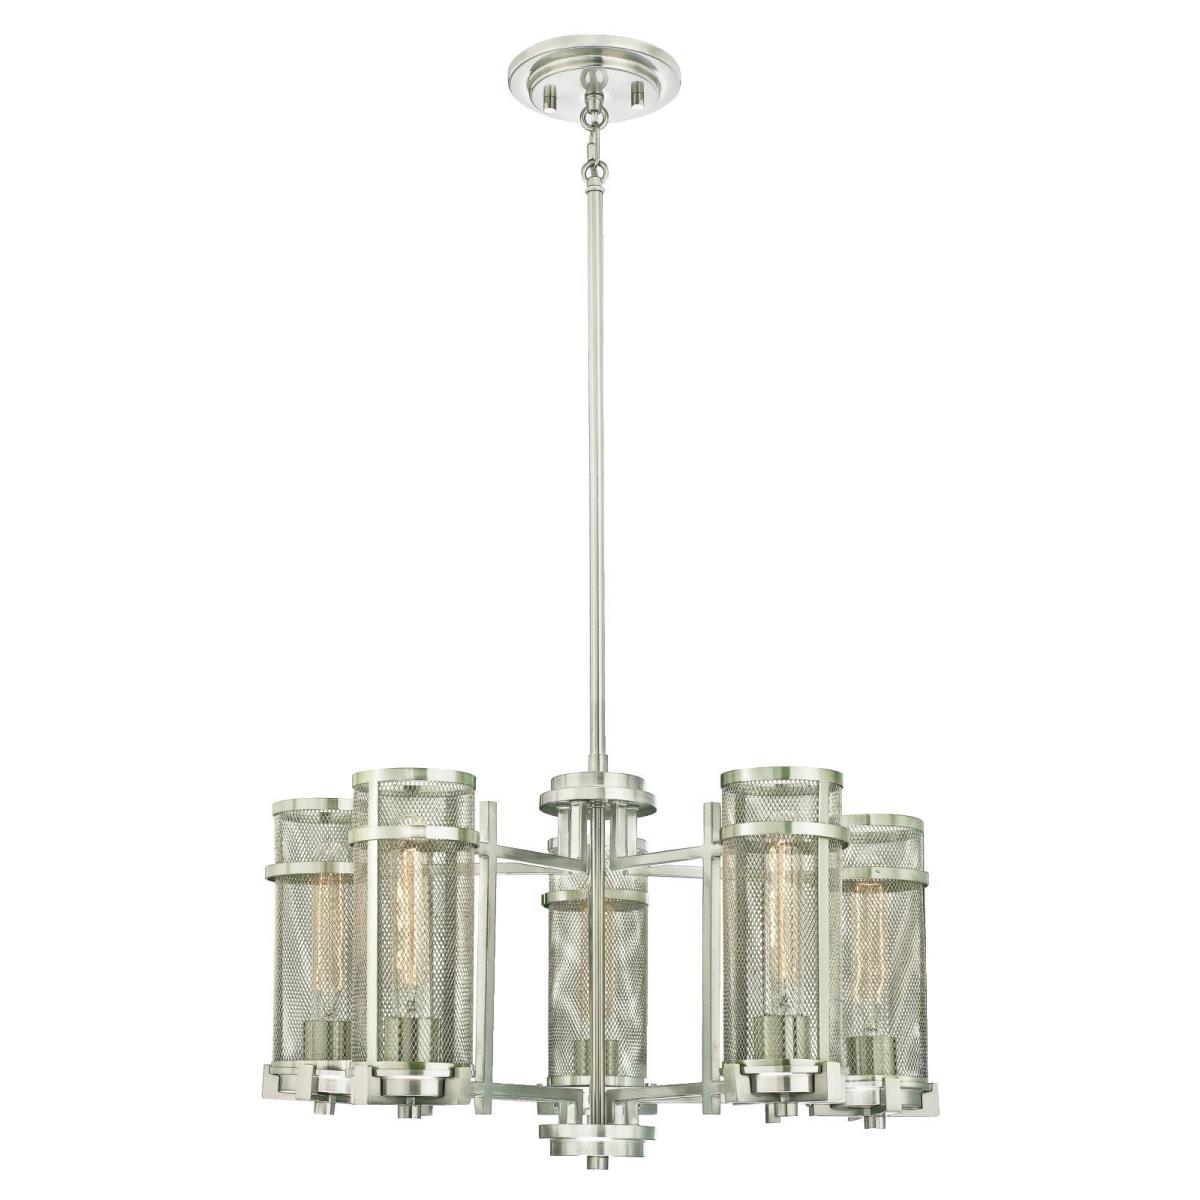 5 Light Chandelier Brushed Nickel Finish with Mesh Shades